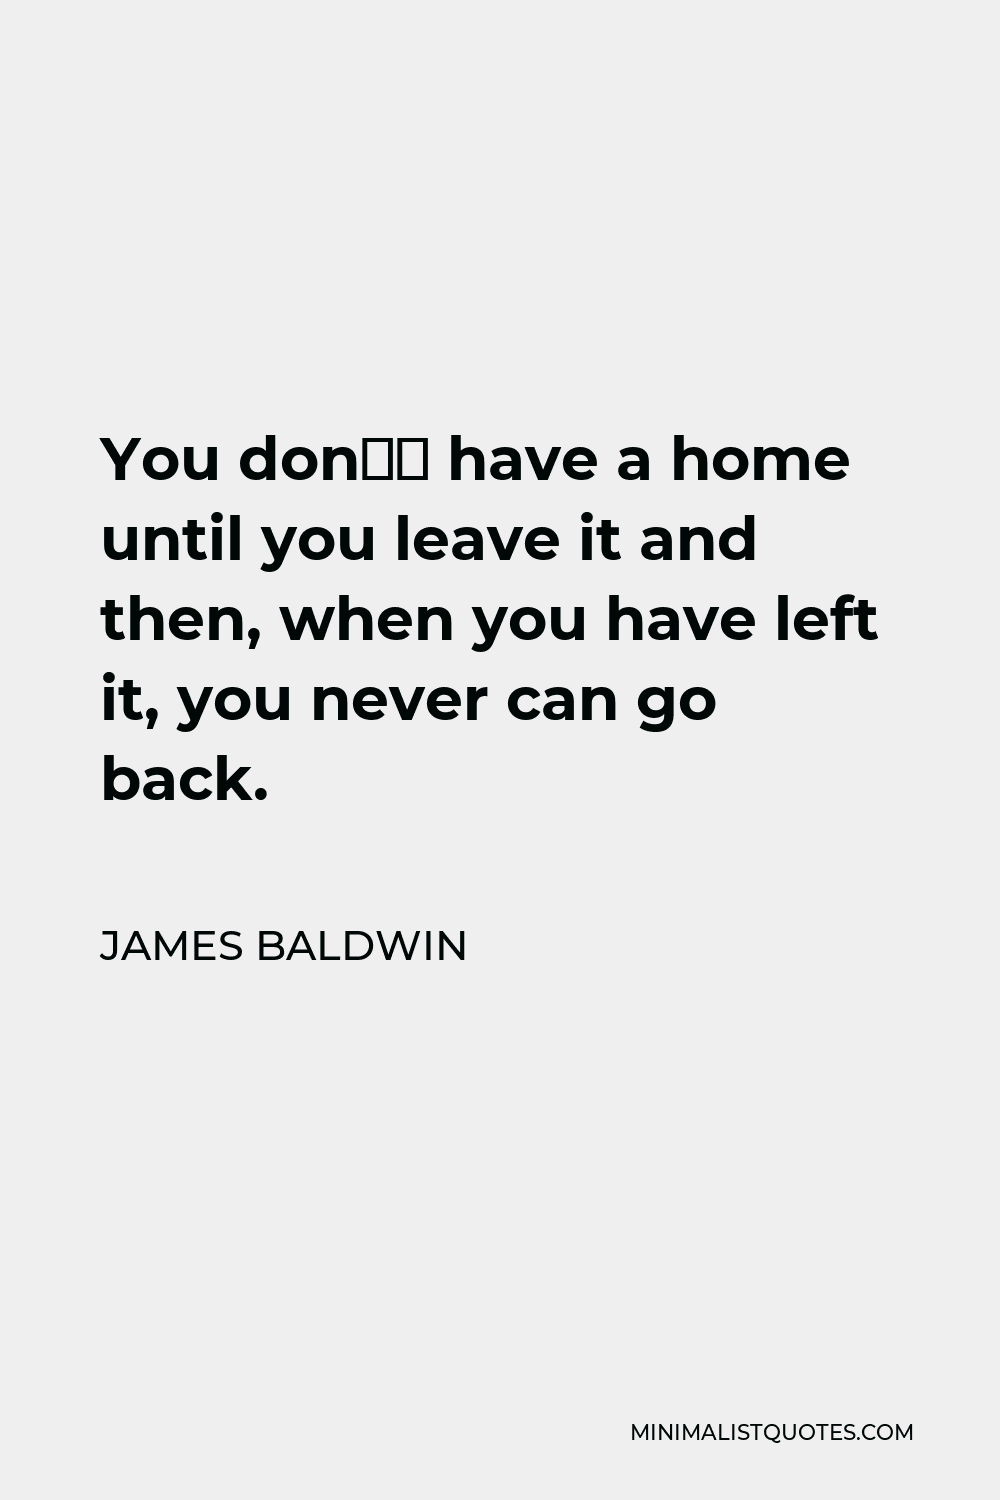 James Baldwin Quote - You don’t have a home until you leave it and then, when you have left it, you never can go back.